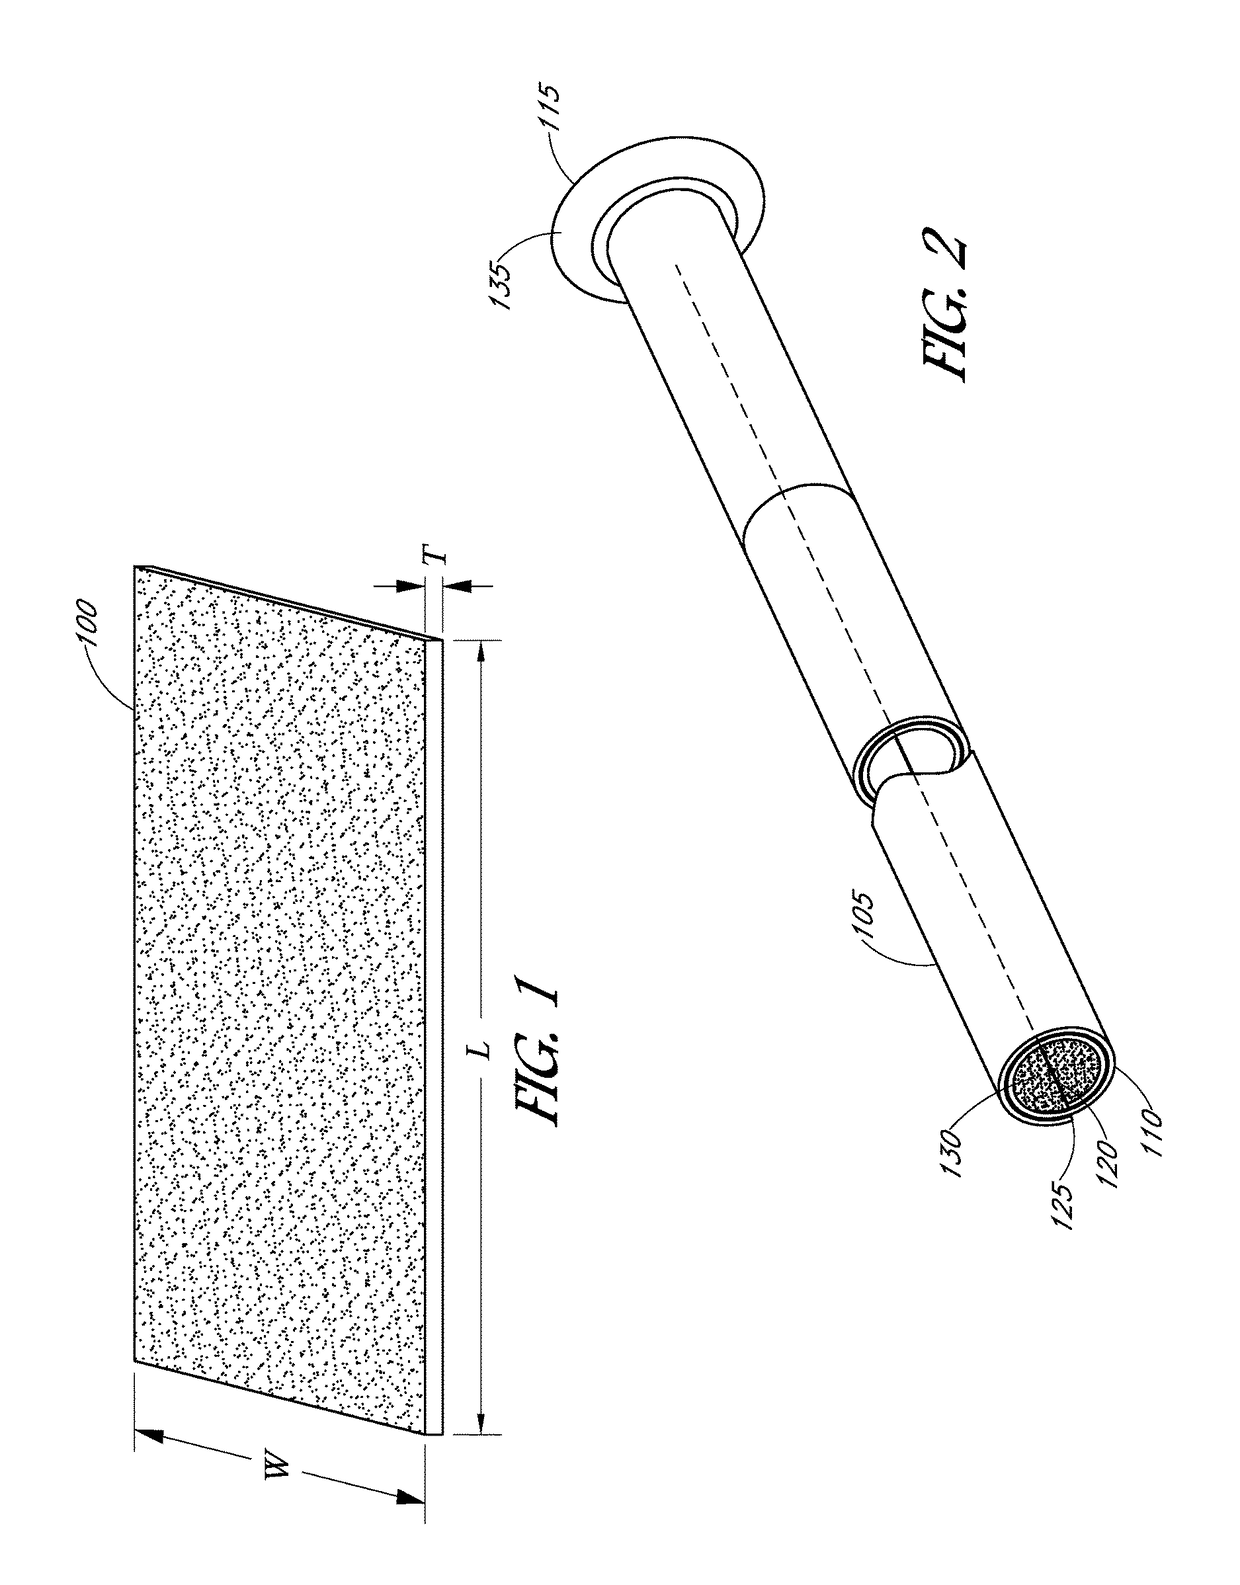 Expandable sheath and methods of use